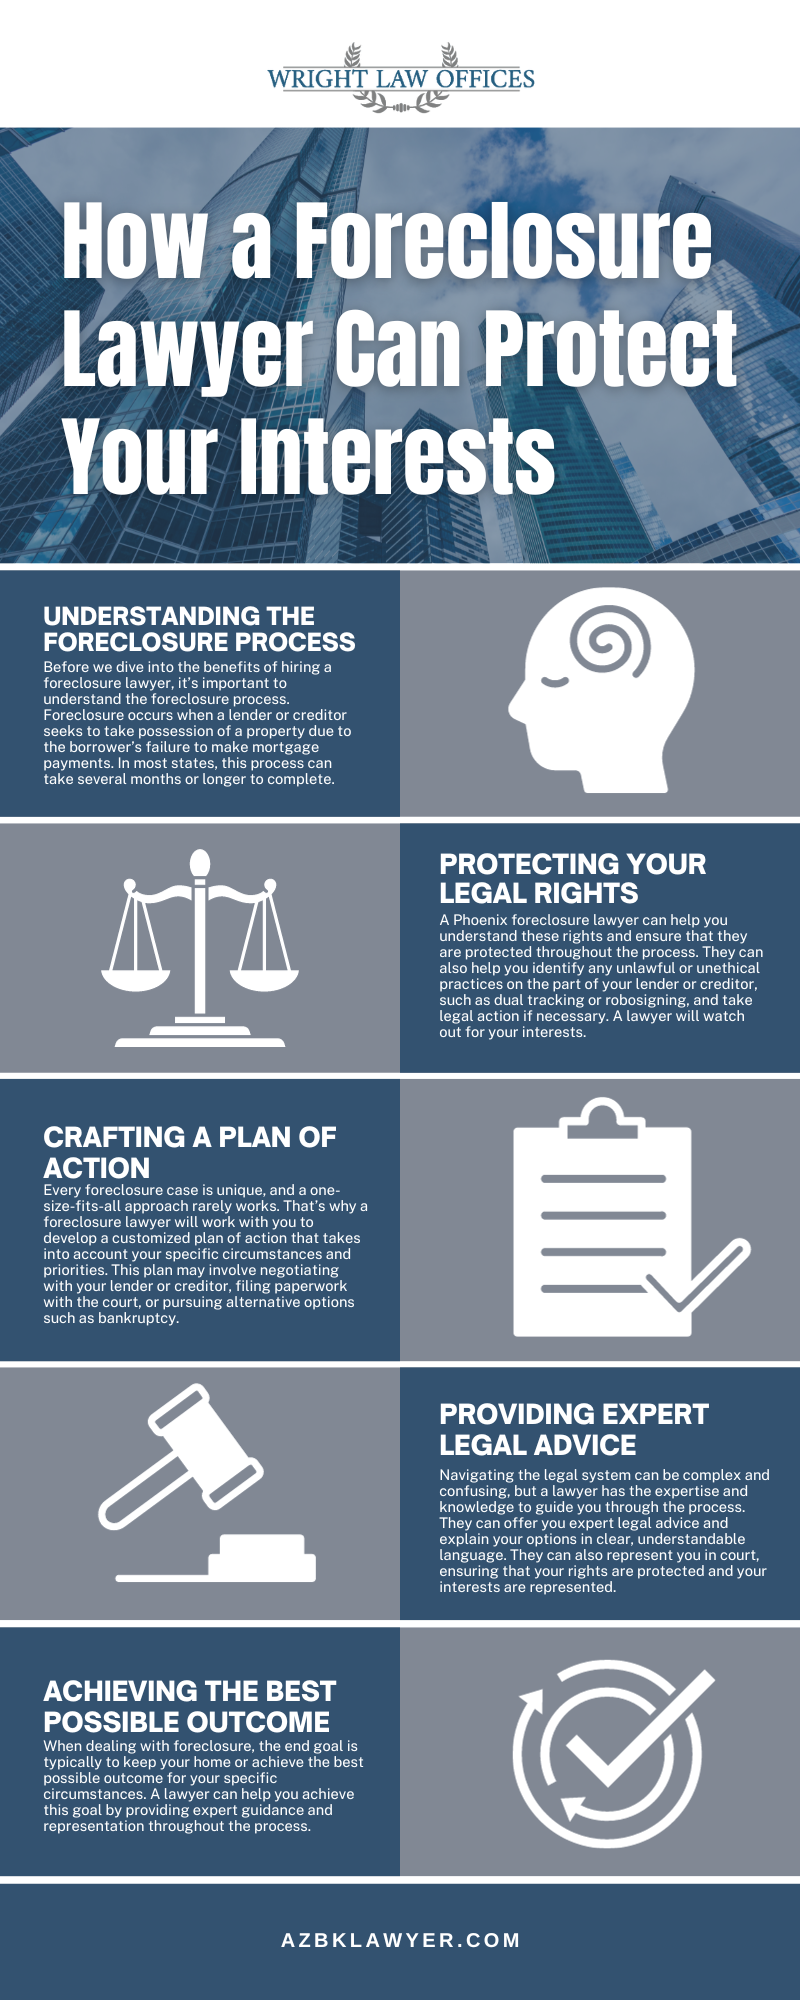 How a Foreclosure Lawyer Can Protect Your Interests Infographic